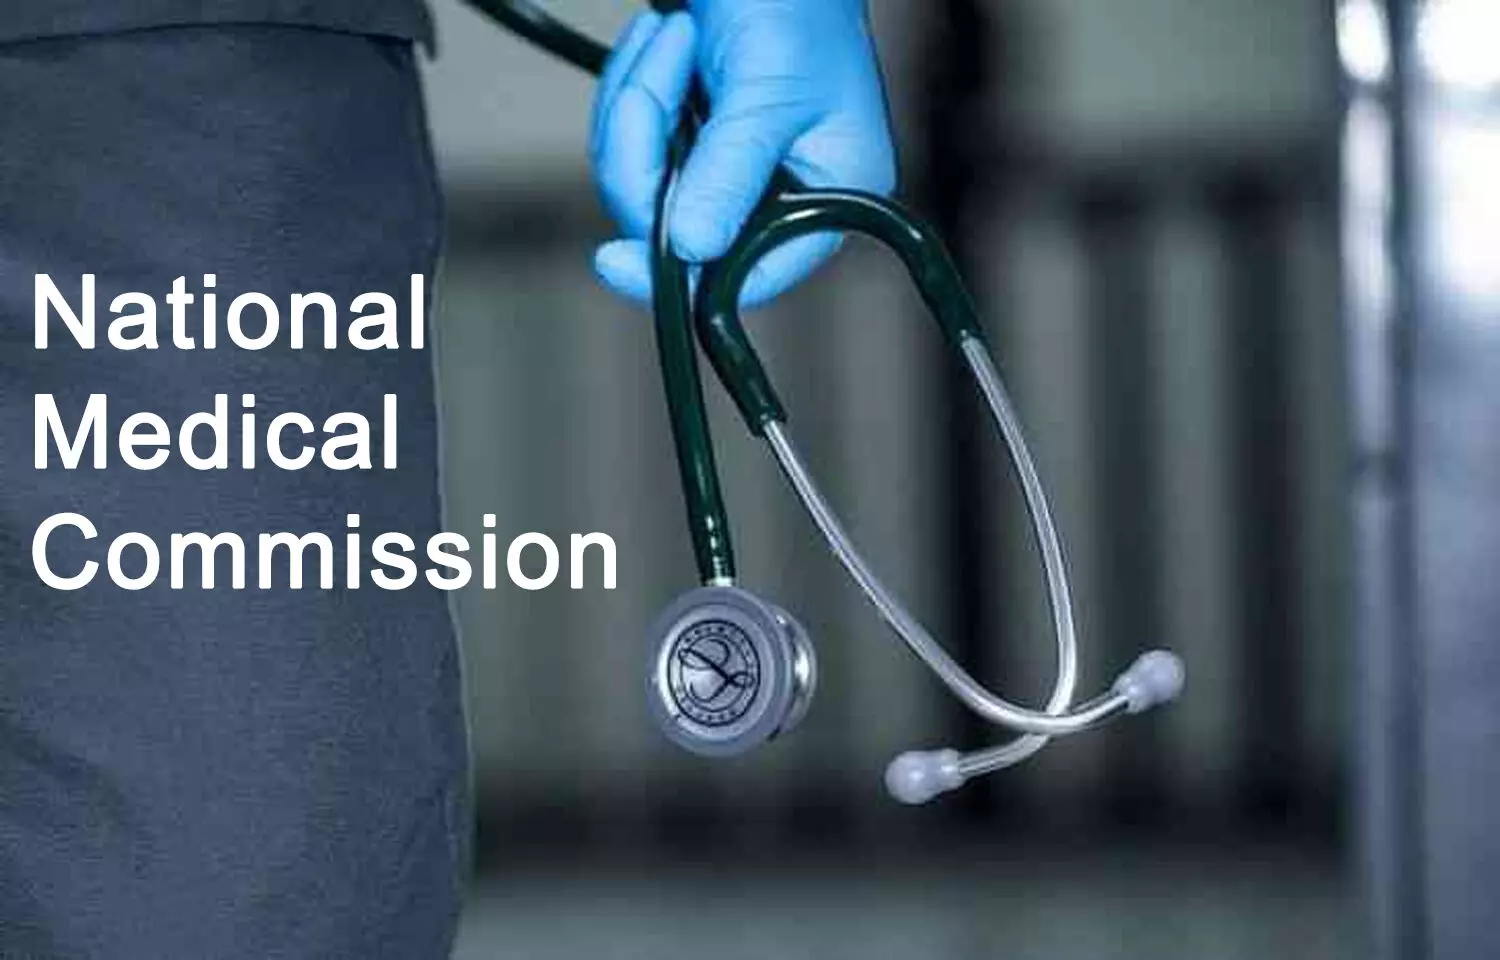 MBBS course: National Medical Commission calls for Re-opening of Medical Colleges before December 1, proposes schedule for medical training